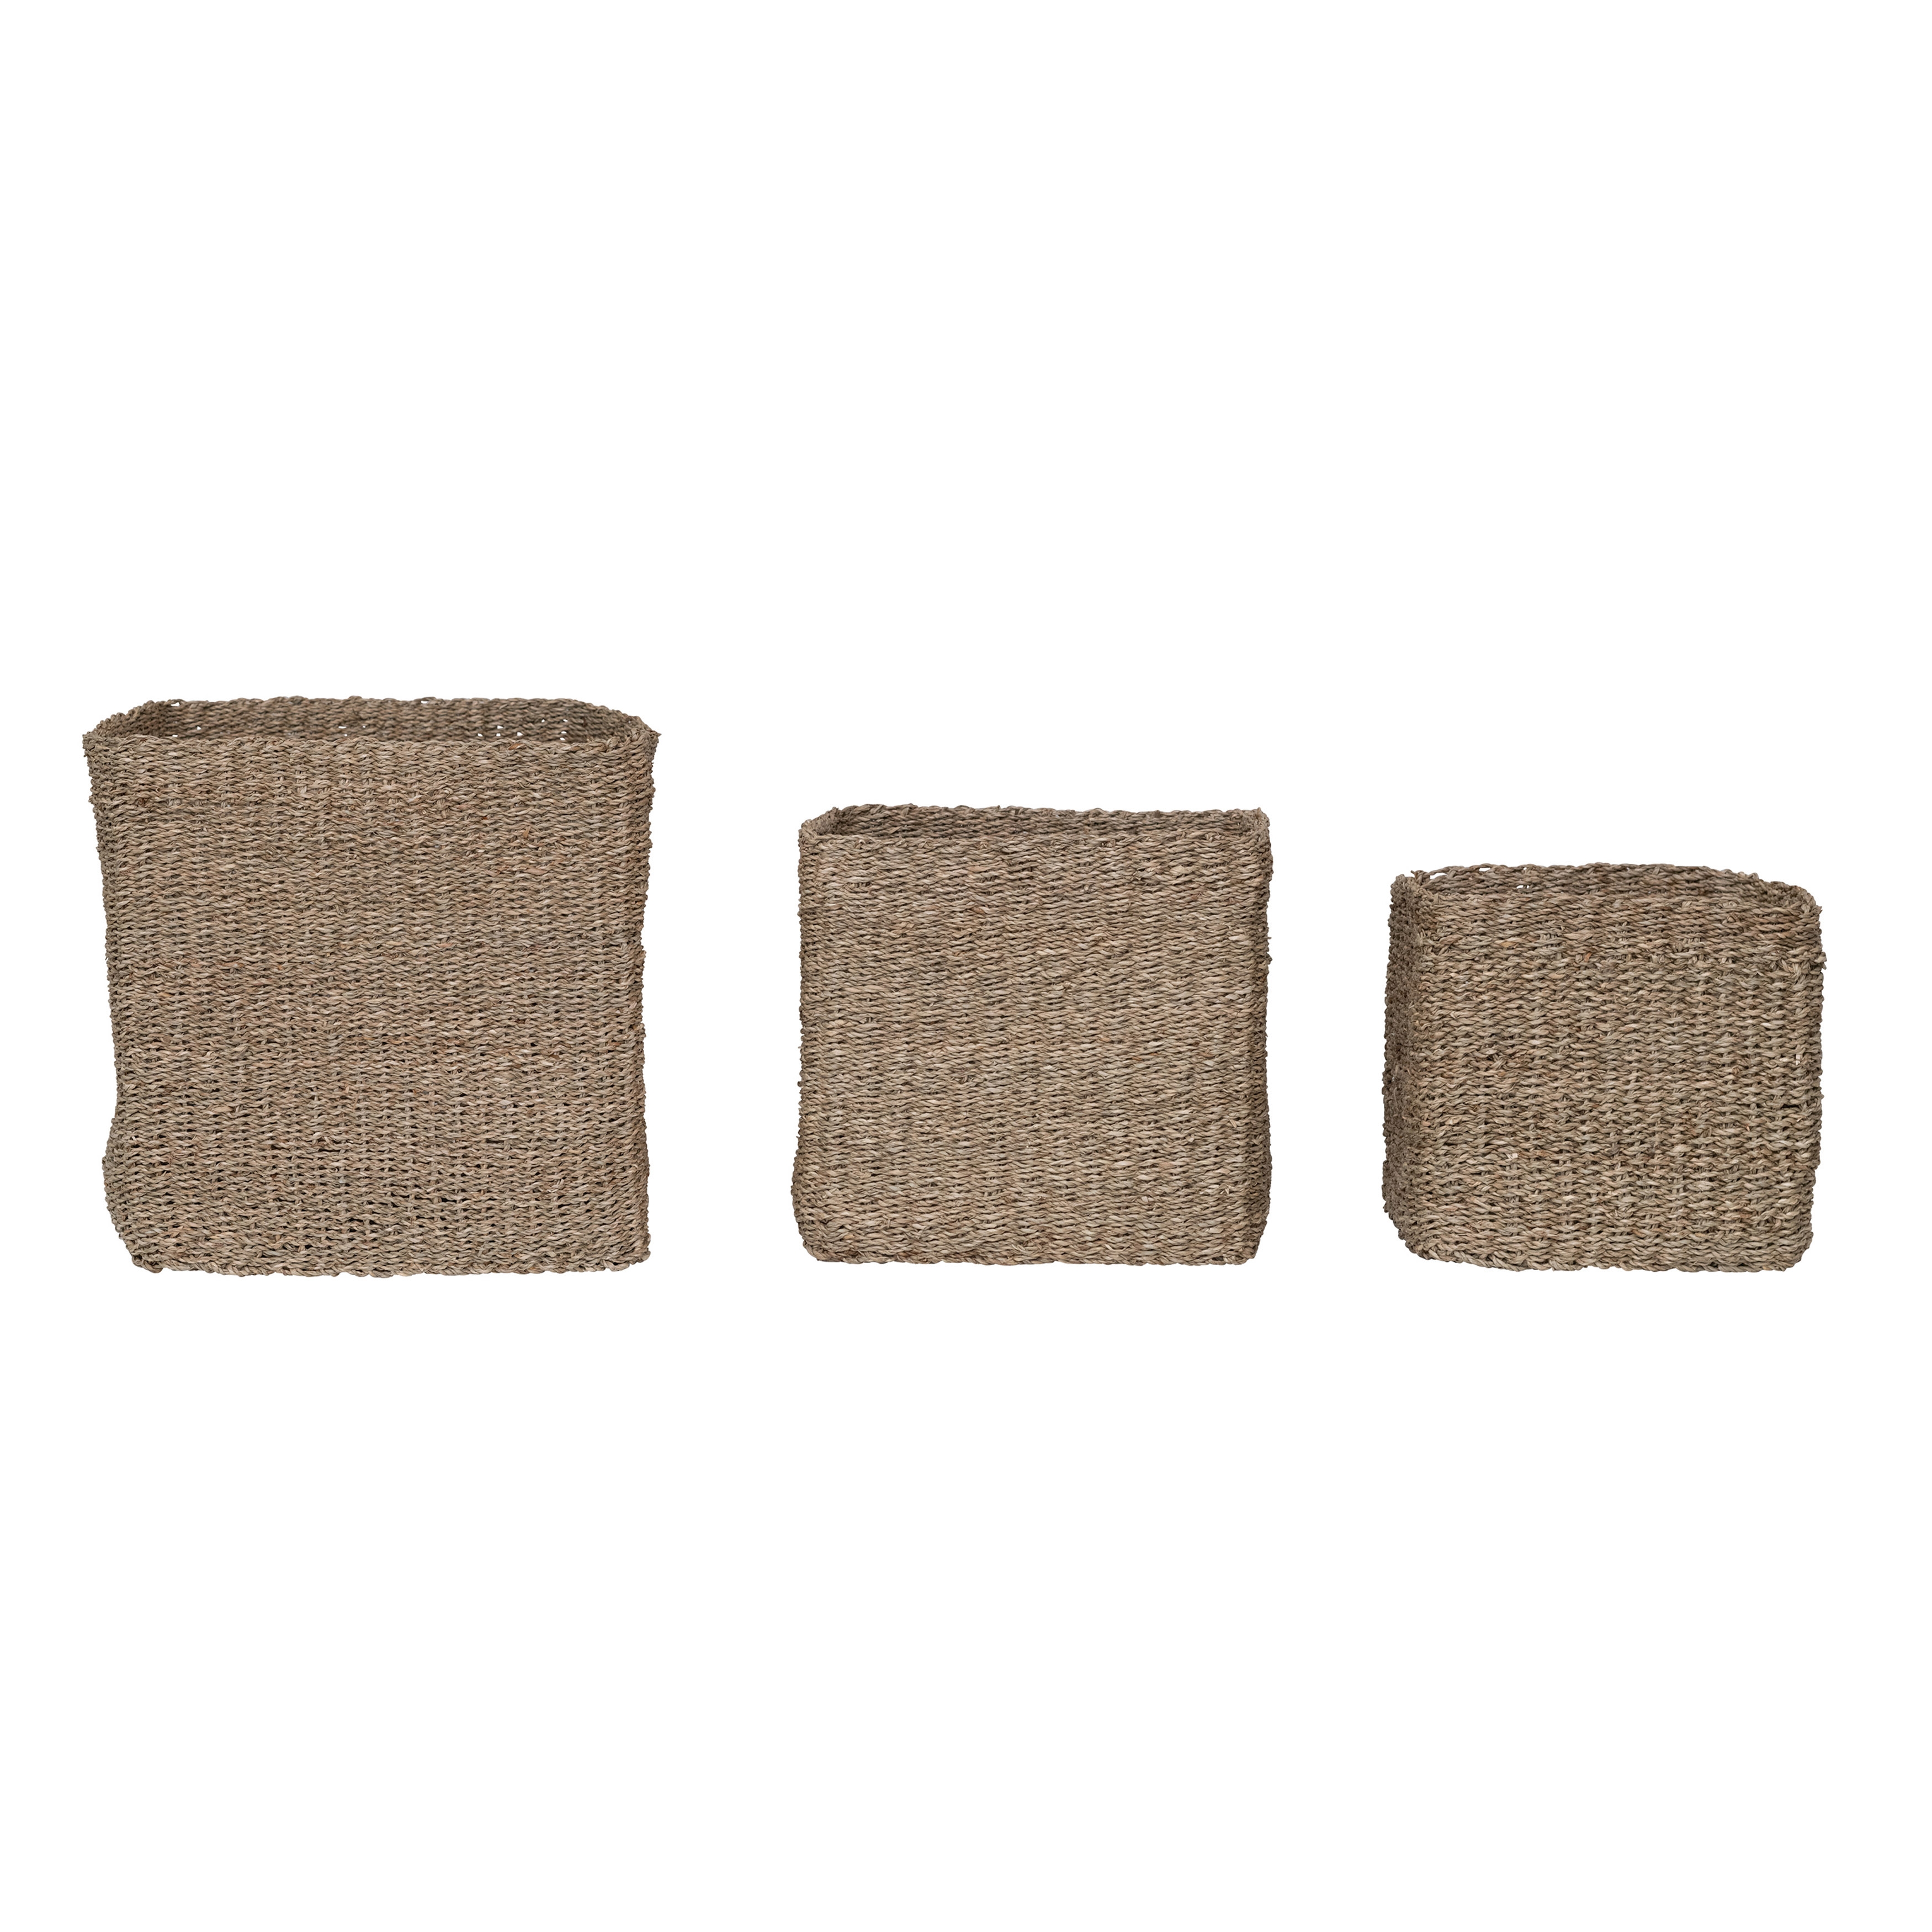  Handwoven Seagrass Baskets, Set of 3, Natural - Image 0